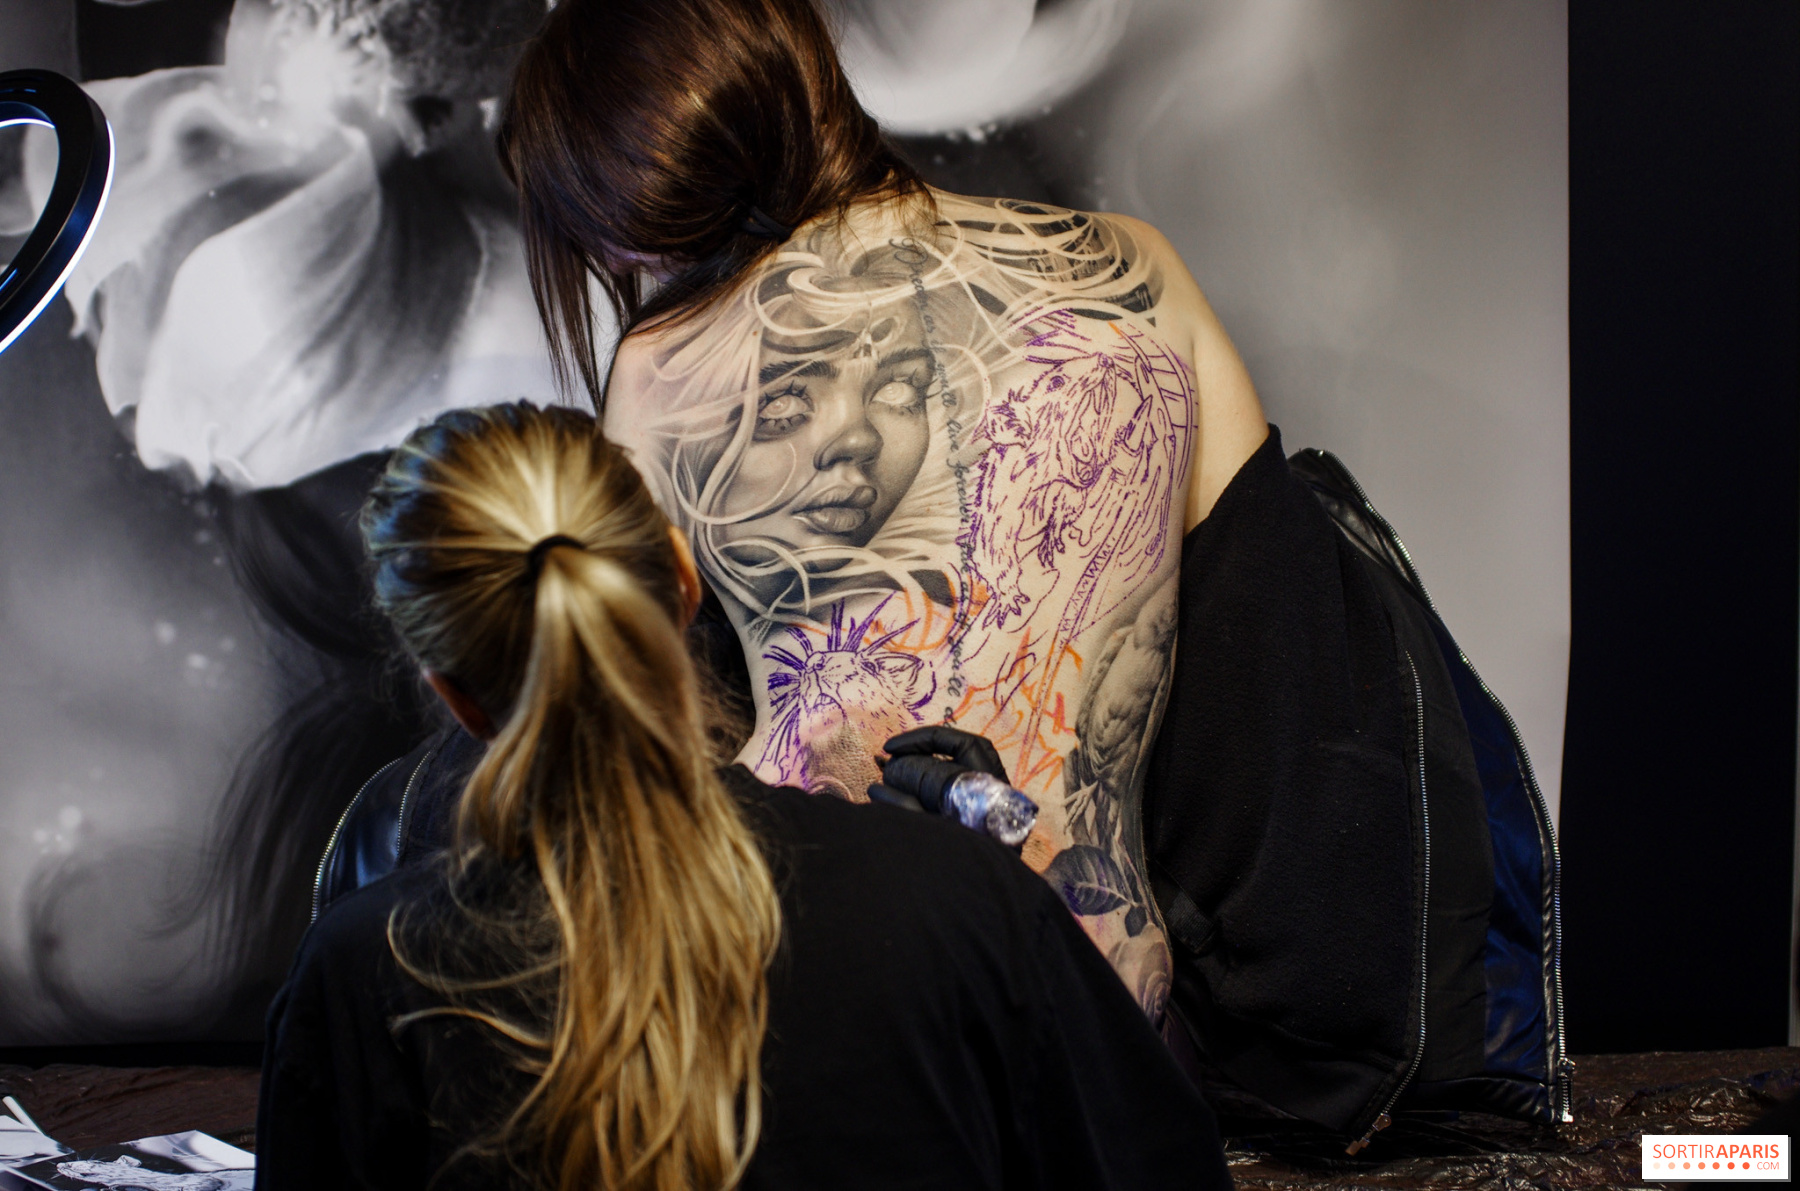 Tattoo festival in 10th year, now the biggest in Australasia | RNZ News